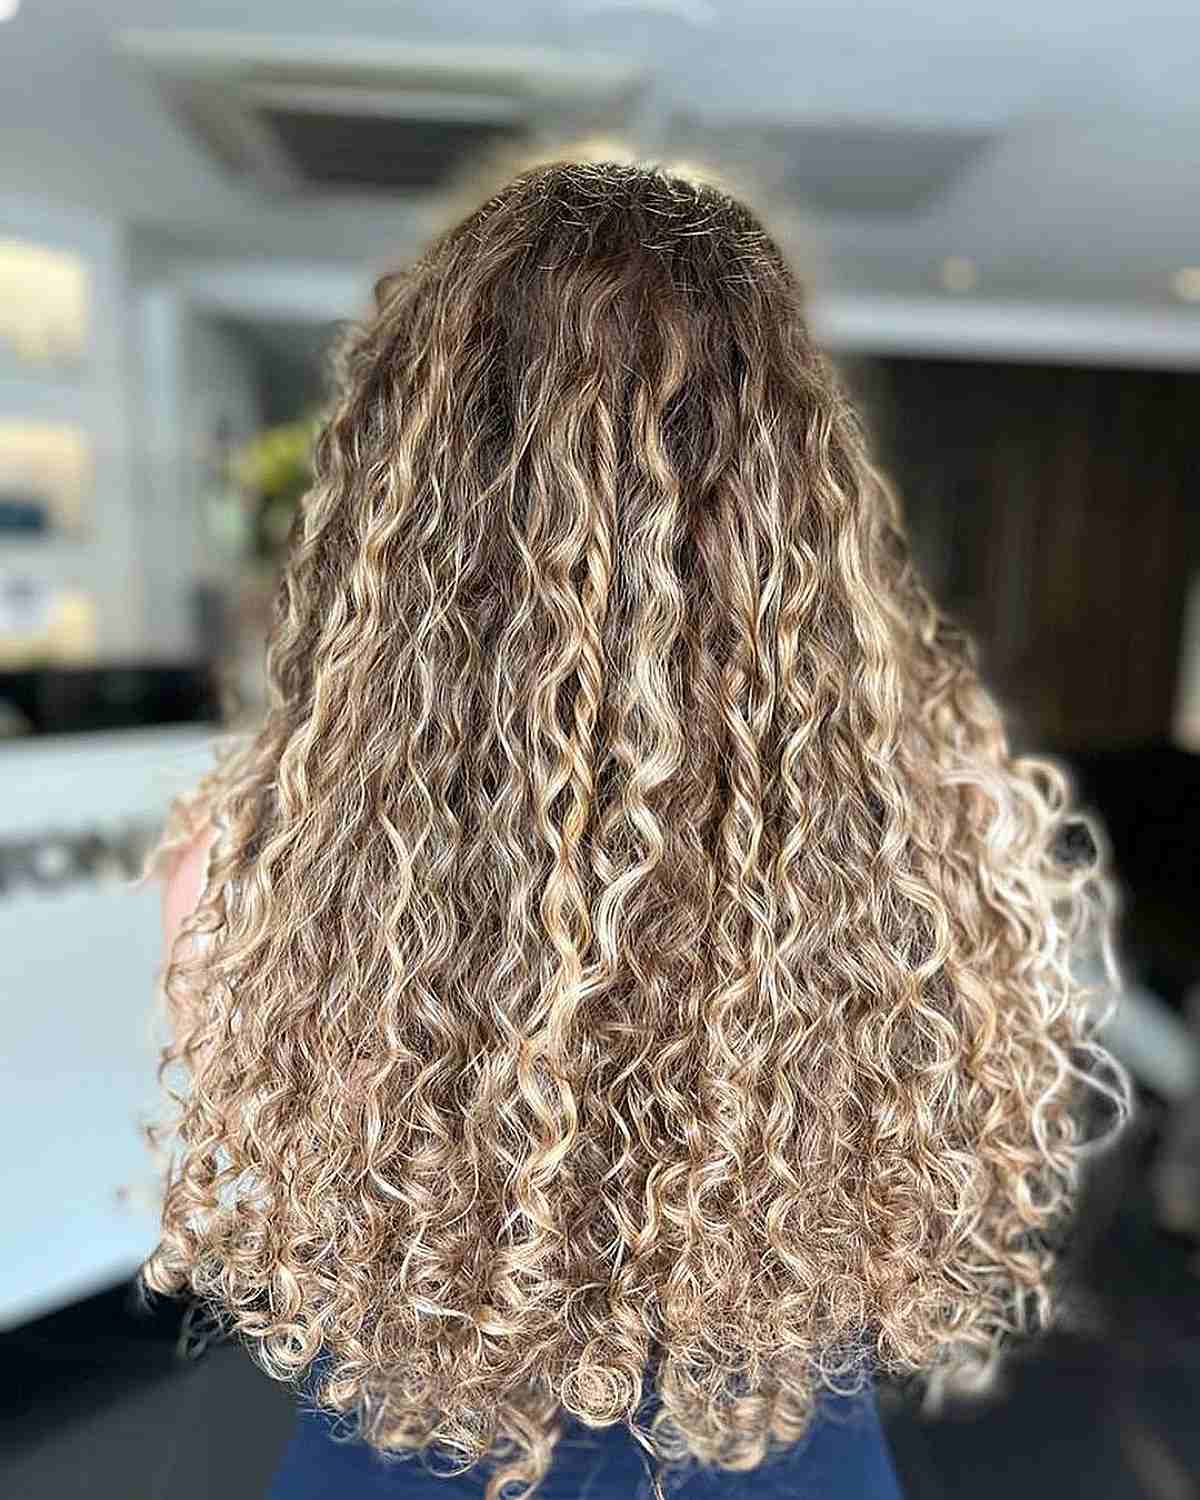 Balayage for Curly Hair: 25 Stunning Ideas